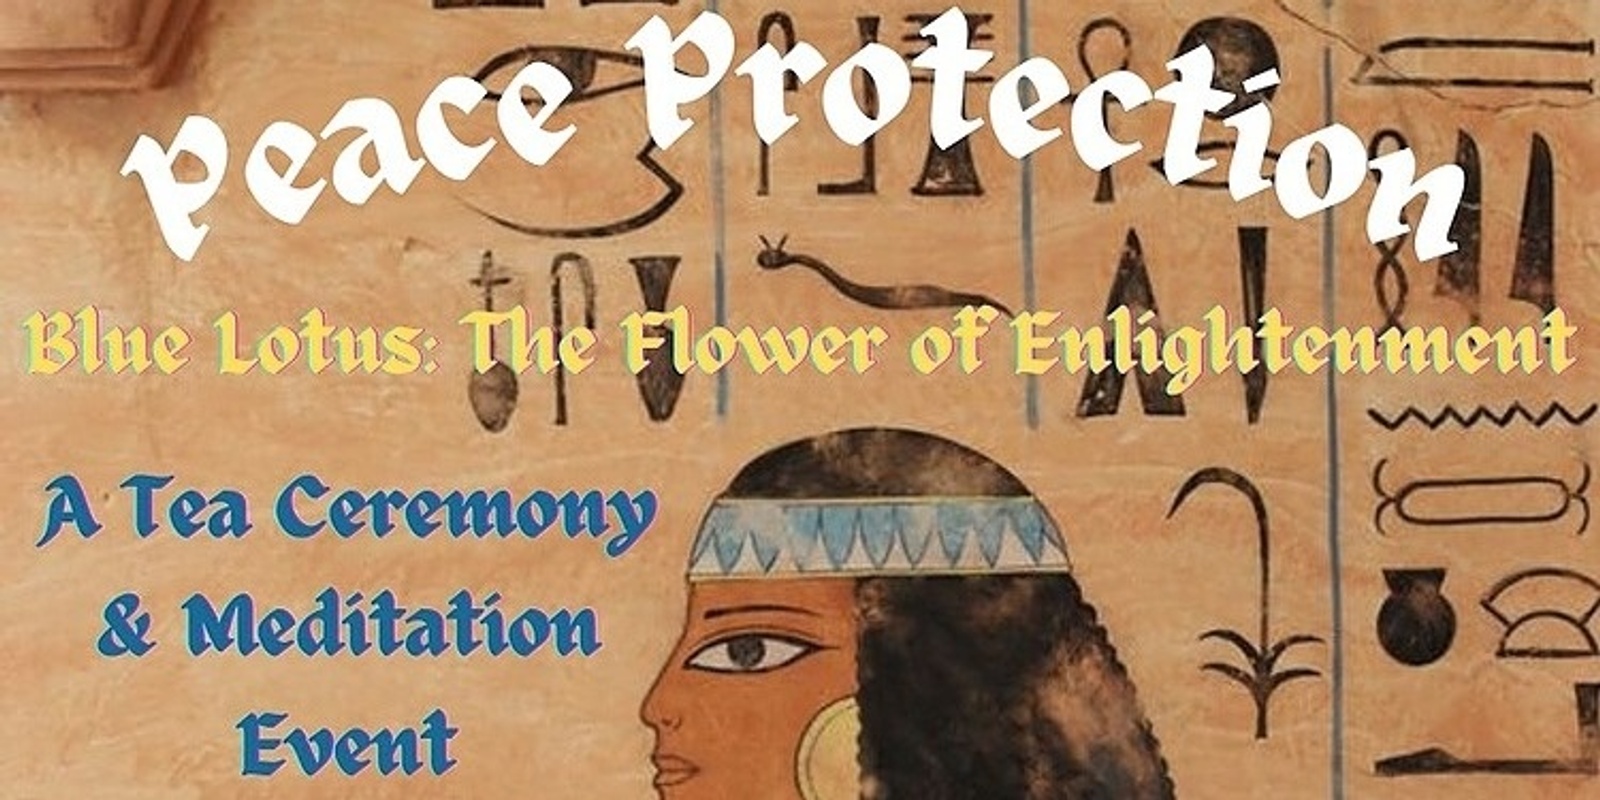 Peace Protection - Blue Lotus: The Flower of Enlightenment